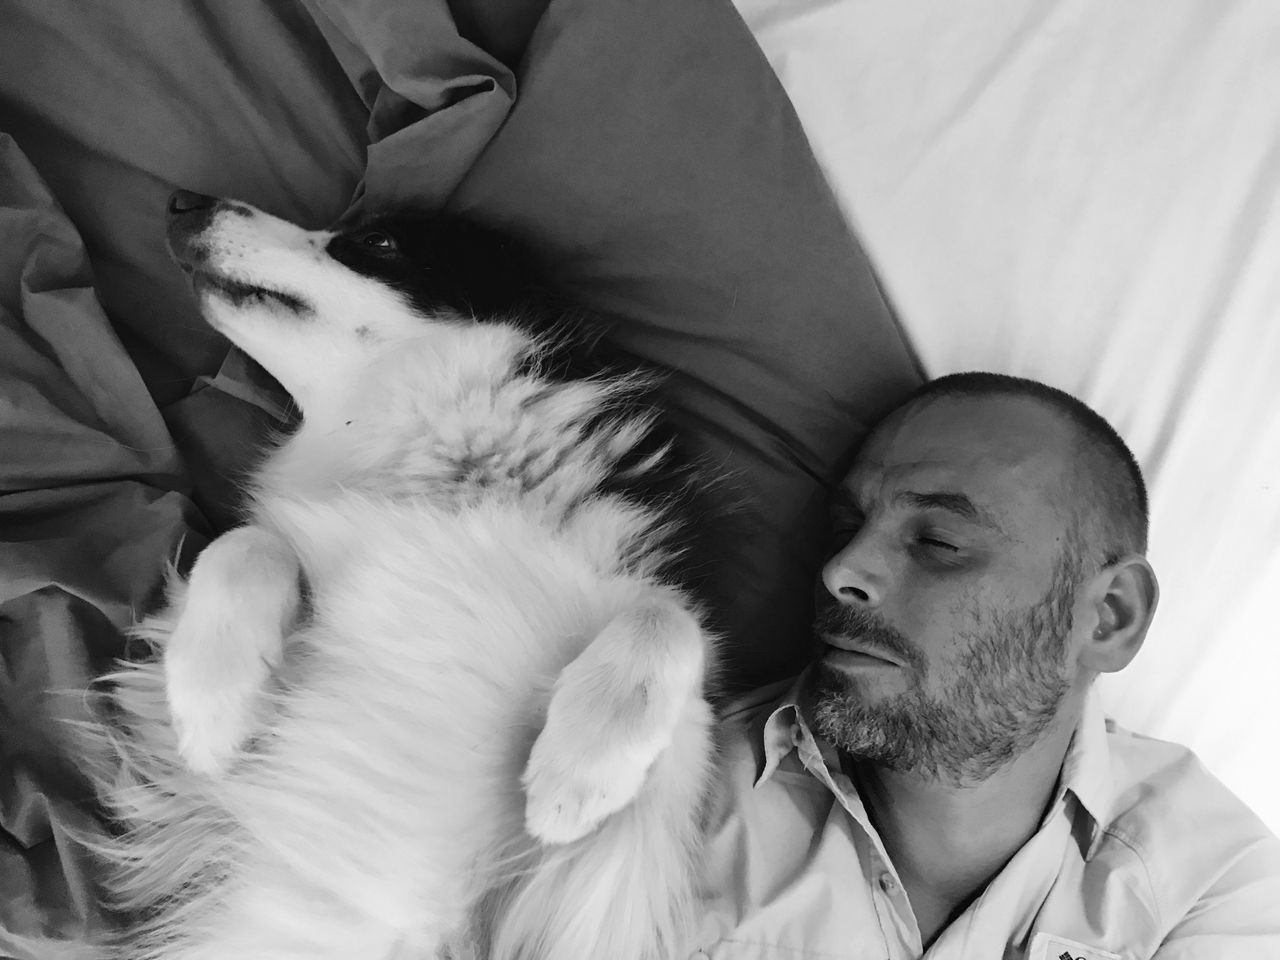 CLOSE-UP OF CAT SITTING ON BED WITH MAN